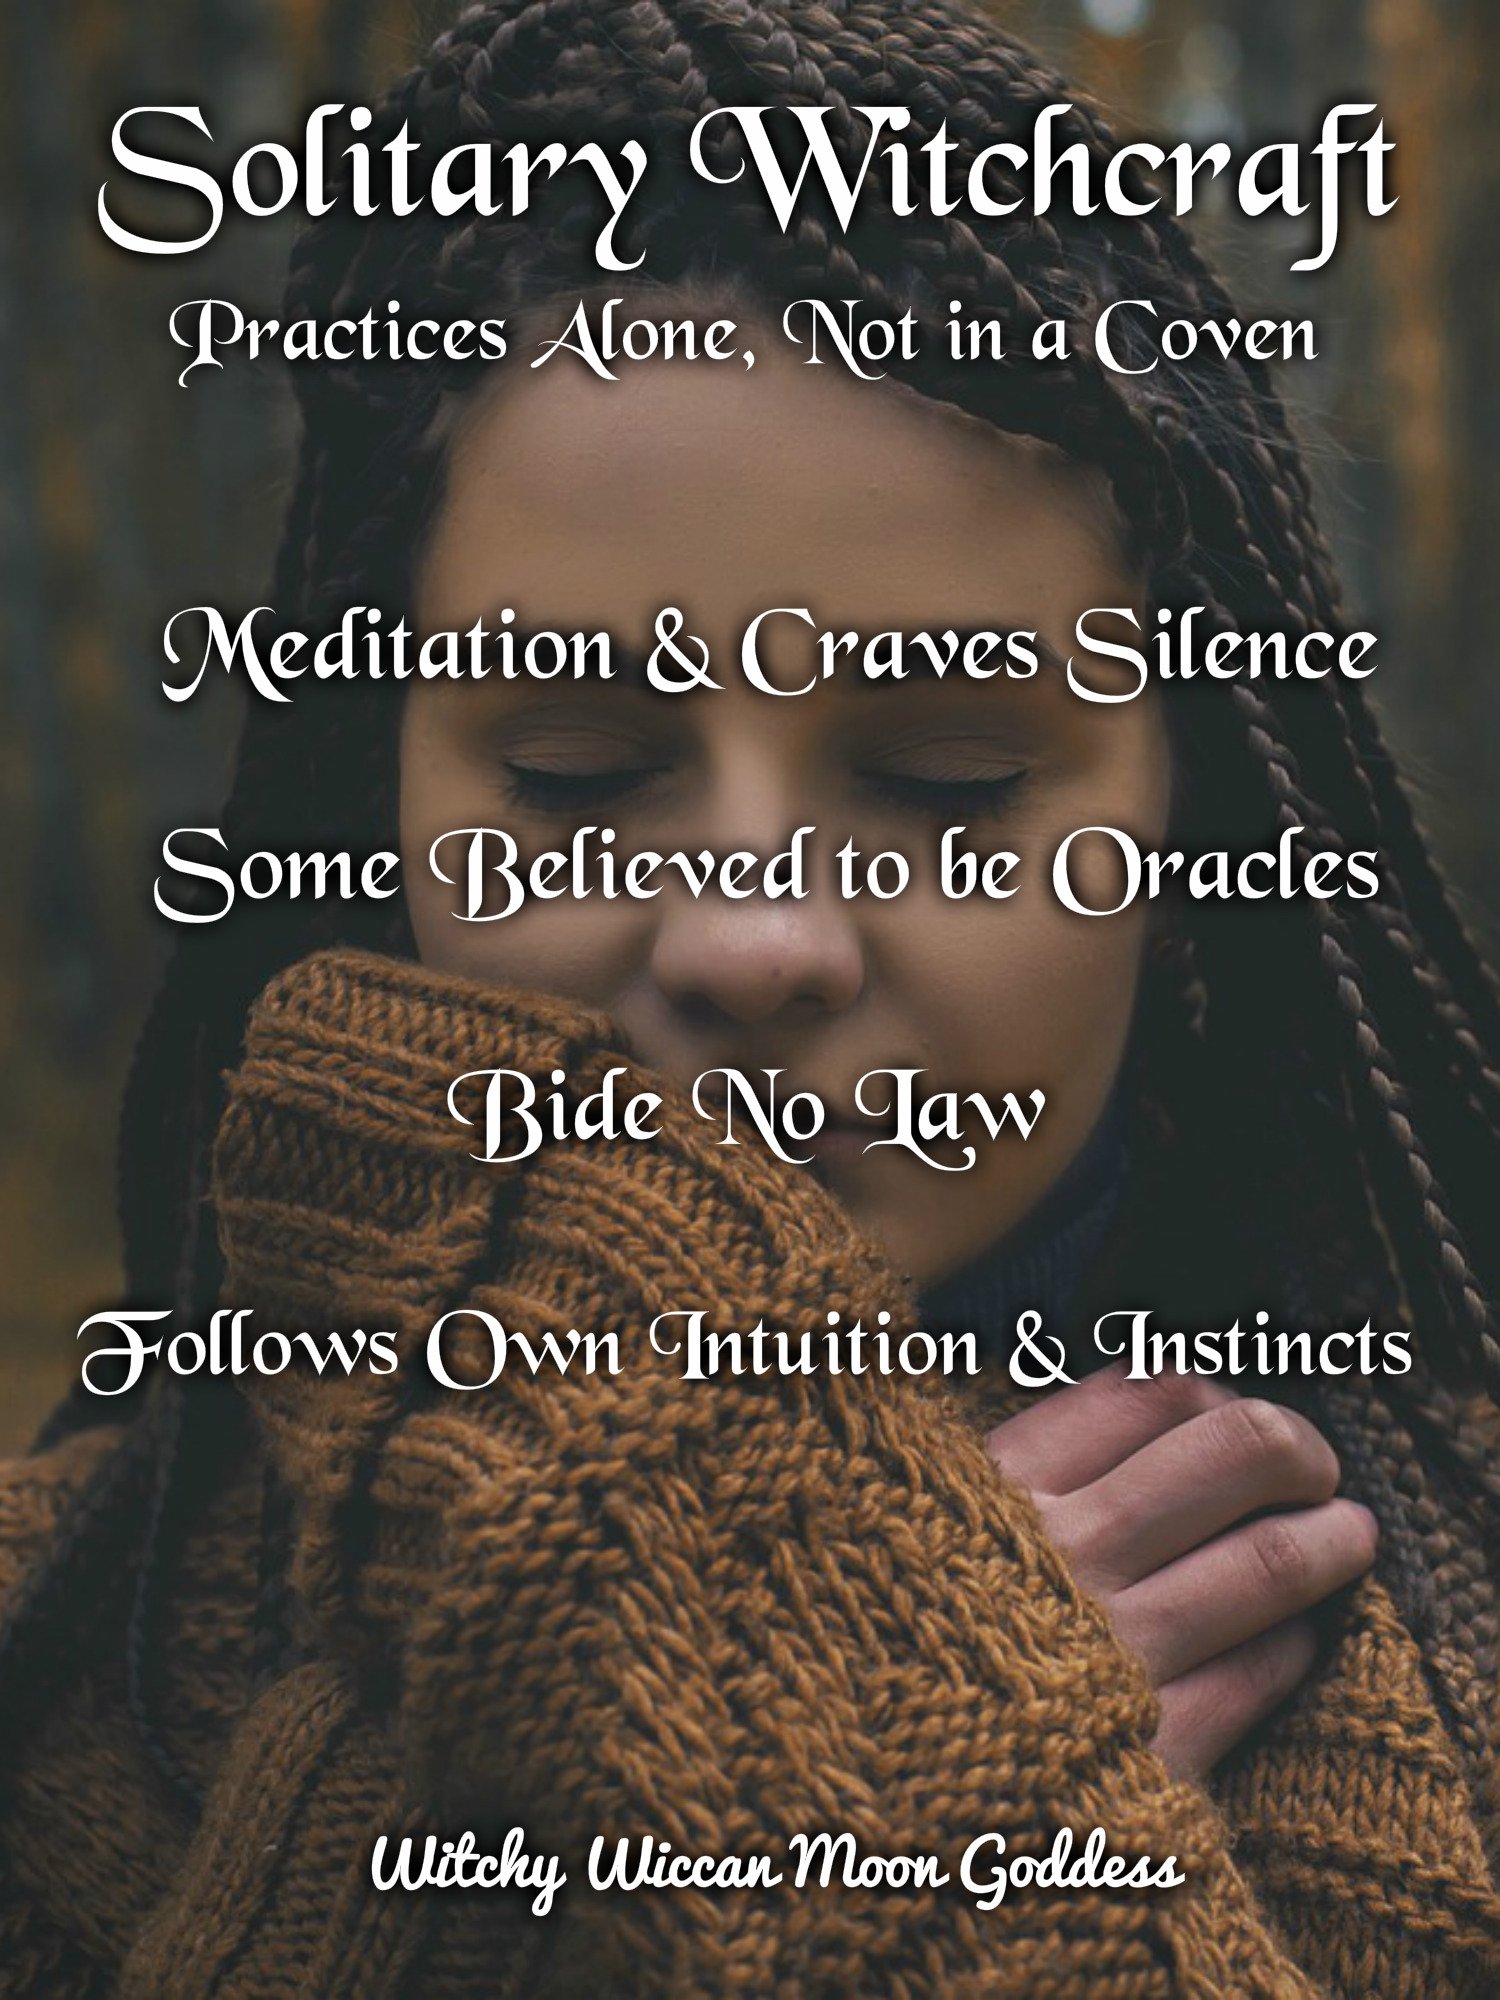 Solitary Witchcraft: Practices alone, not in a coven. Meditation and craves silence. Some believed to be Oracles. Bide no law, follows own intuition and instincts.